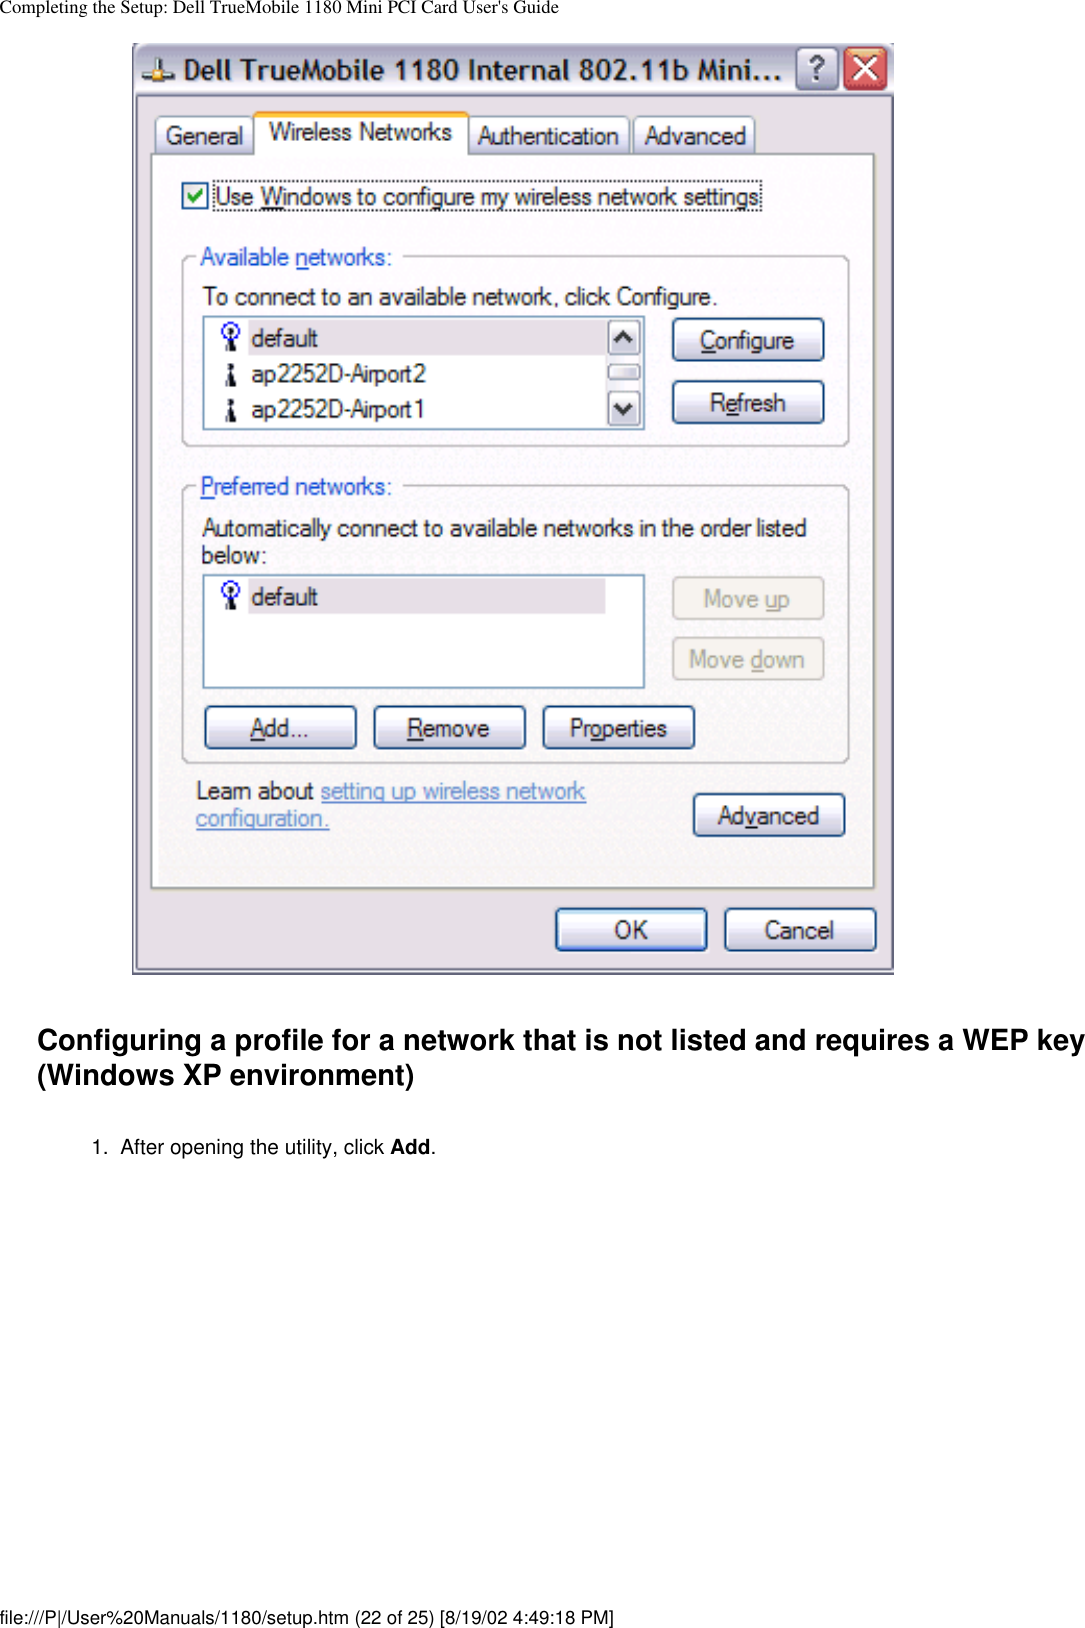 Completing the Setup: Dell TrueMobile 1180 Mini PCI Card User&apos;s GuideConfiguring a profile for a network that is not listed and requires a WEP key (Windows XP environment)1.  After opening the utility, click Add. file:///P|/User%20Manuals/1180/setup.htm (22 of 25) [8/19/02 4:49:18 PM]